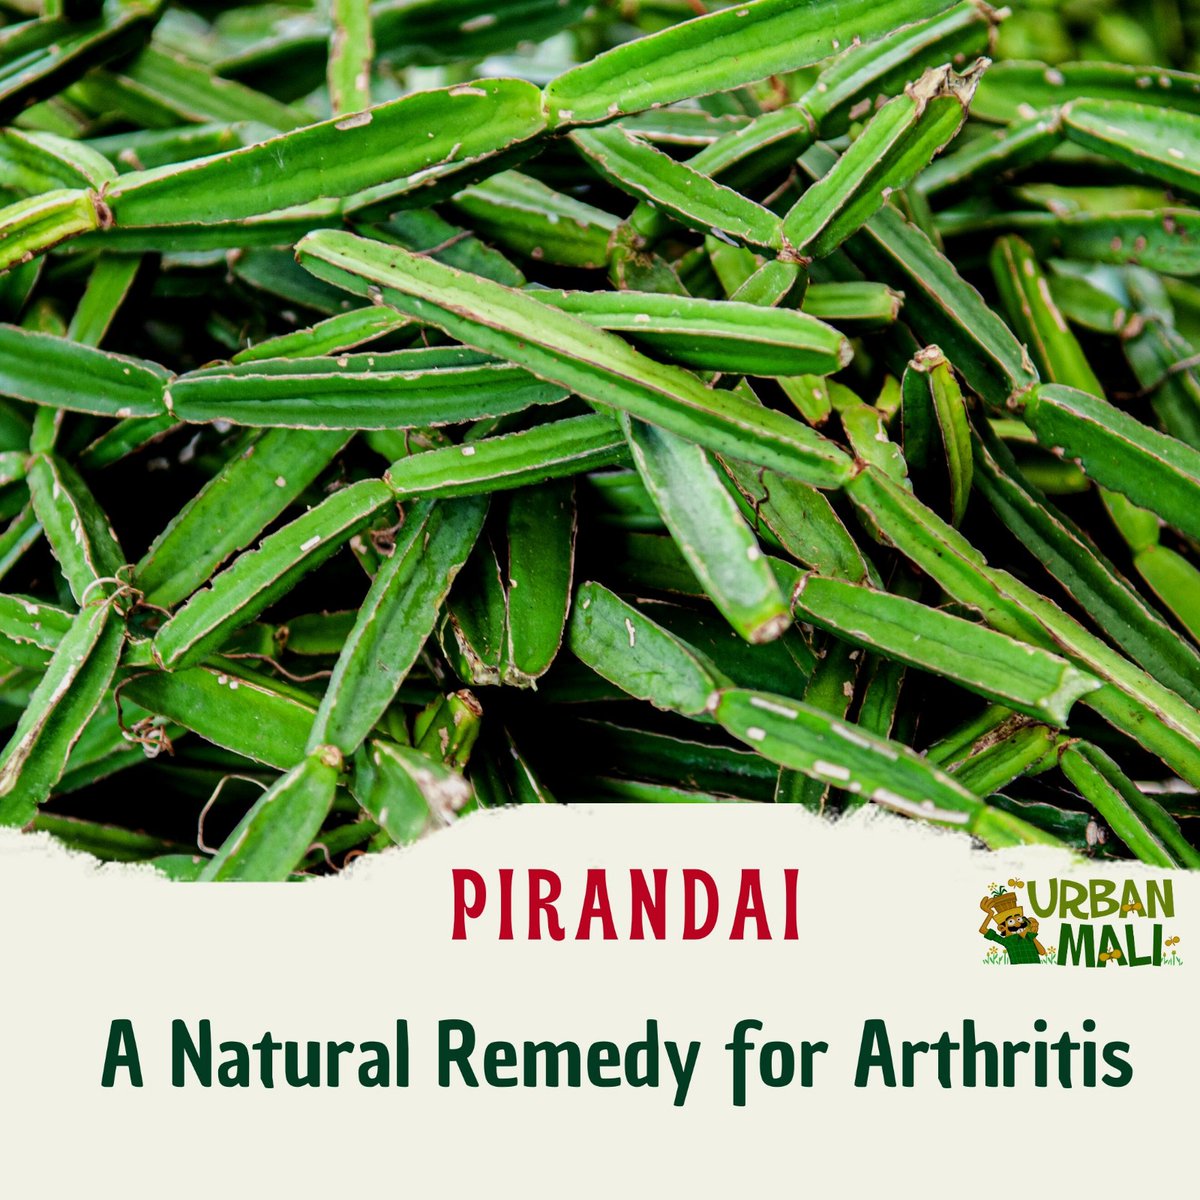 Pirandai, also known as 'Adamant Creeper,' is not only a unique plant but also a traditional remedy for arthritis.

#PirandaiPower #ArthritisRelief#AdamantCreeper#veldgrape#Pirandai#getplanted #plantcommunity #urbanmali #urbangardening #homegardening